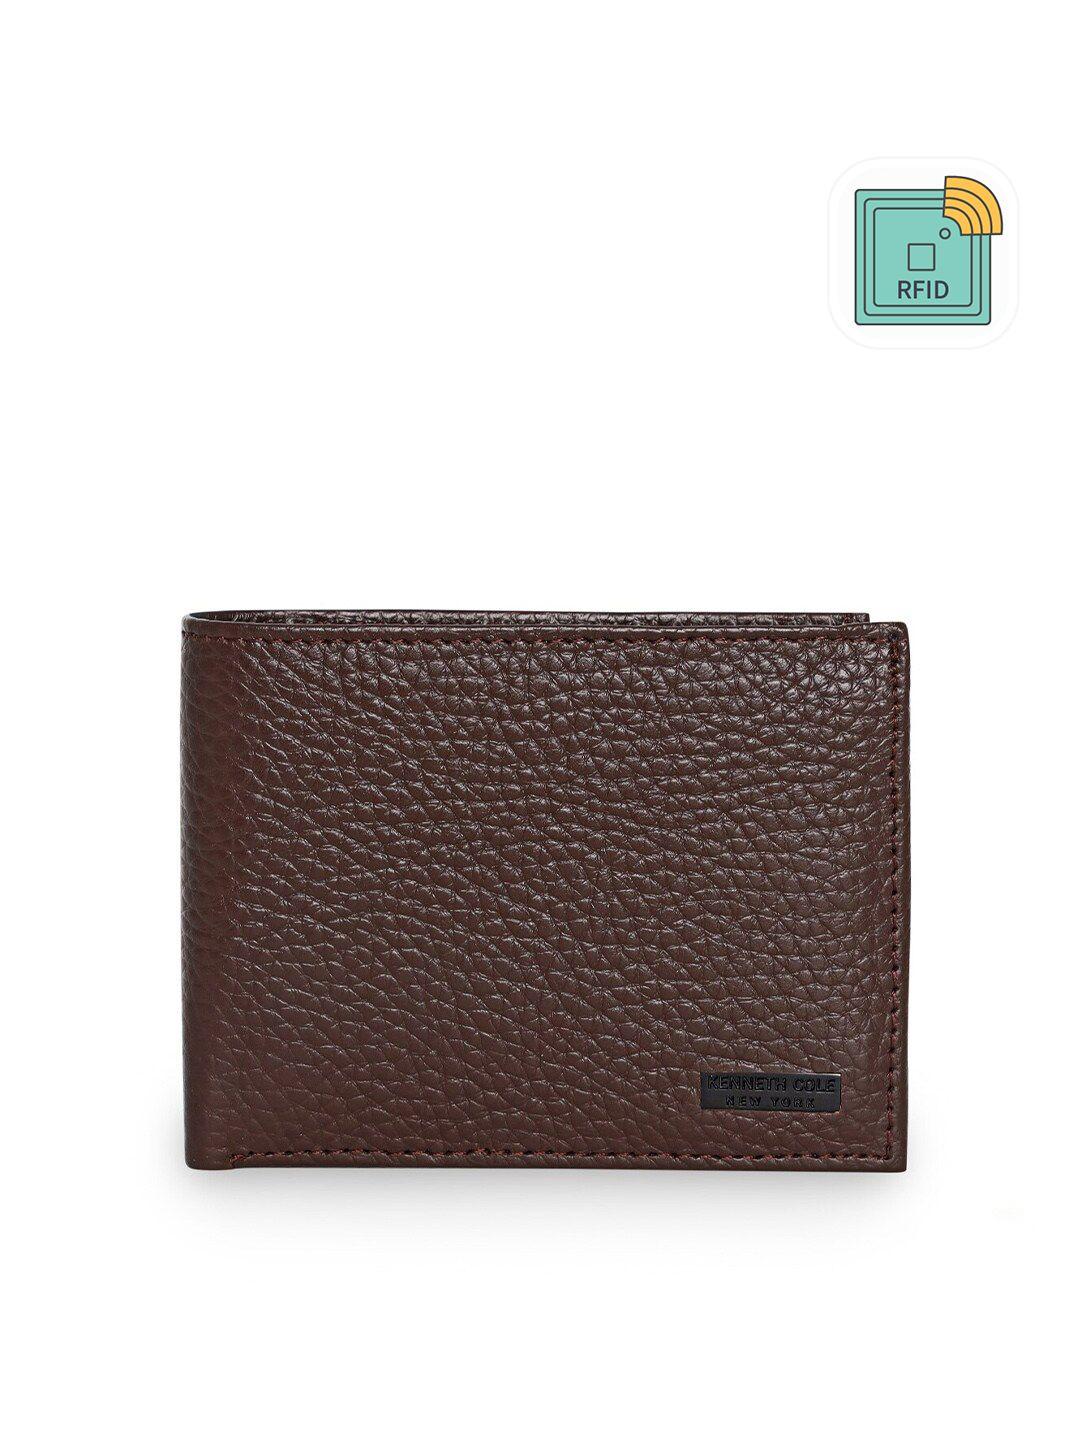 kenneth-cole-men-brown-textured-leather-two-fold-wallet-with-rfid